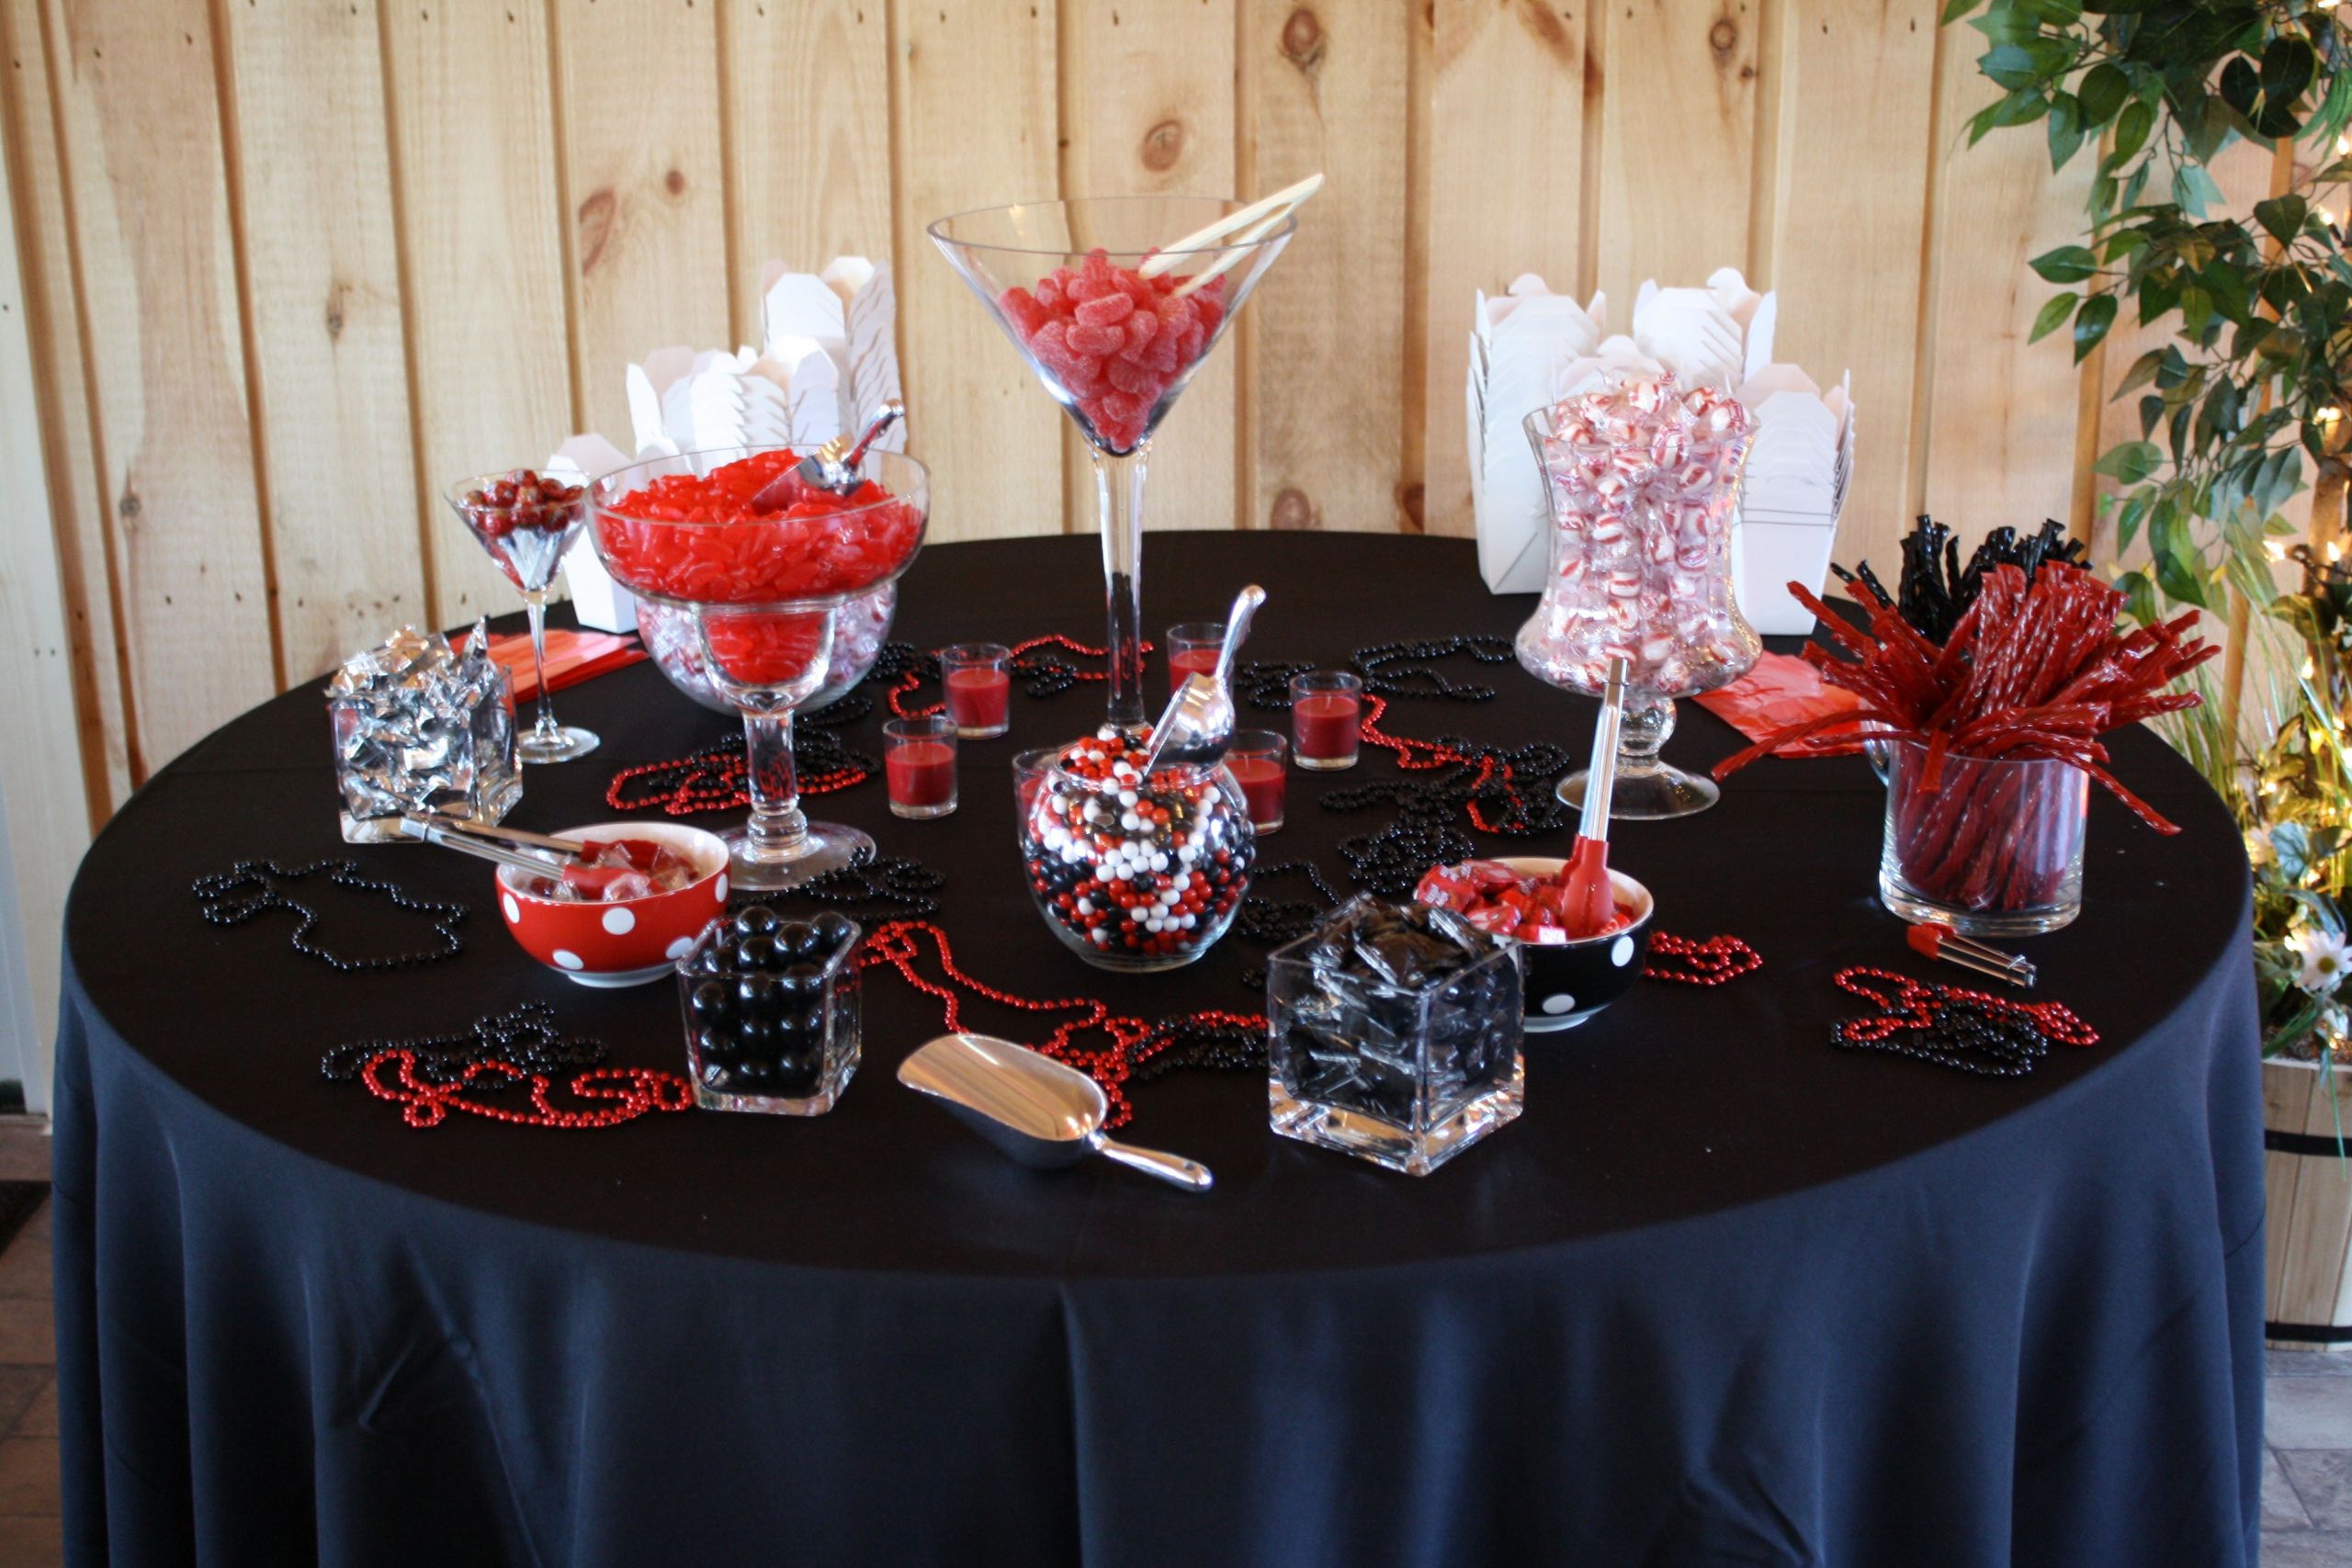 Red White And Black Graduation Party Ideas
 Black Red and White Candy Table for a Bar Mitzvah